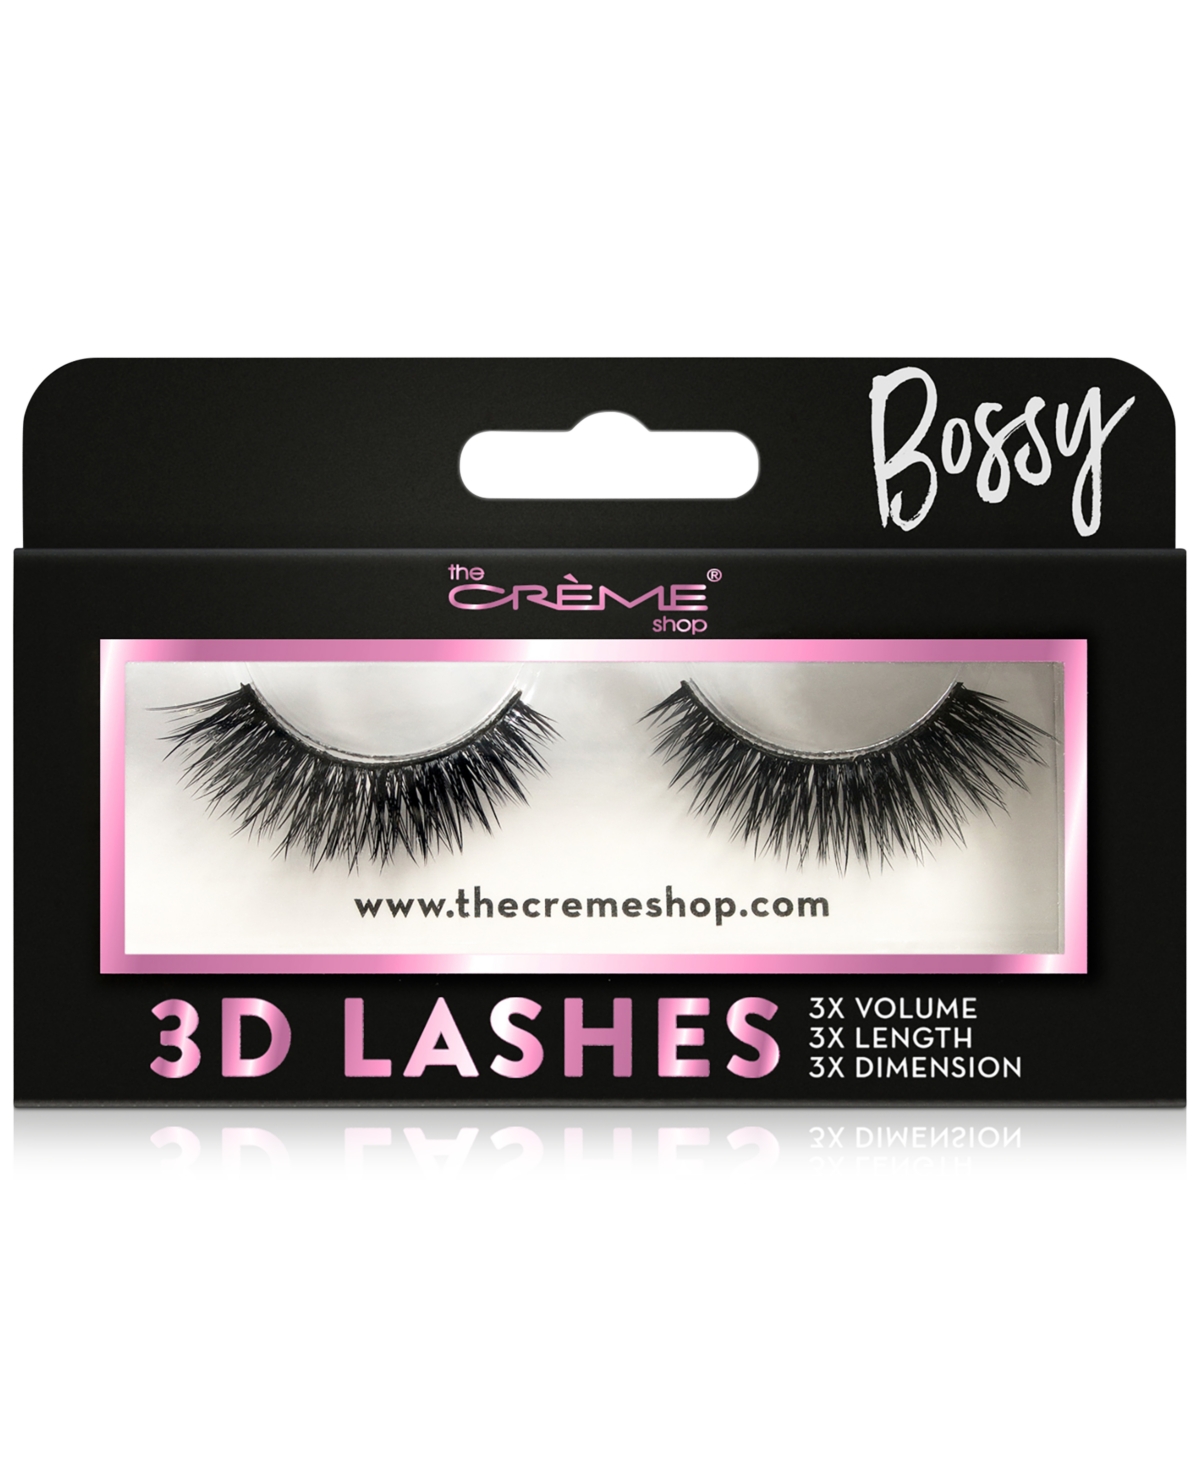 The Creme Shop 3d Lashes In Bossy